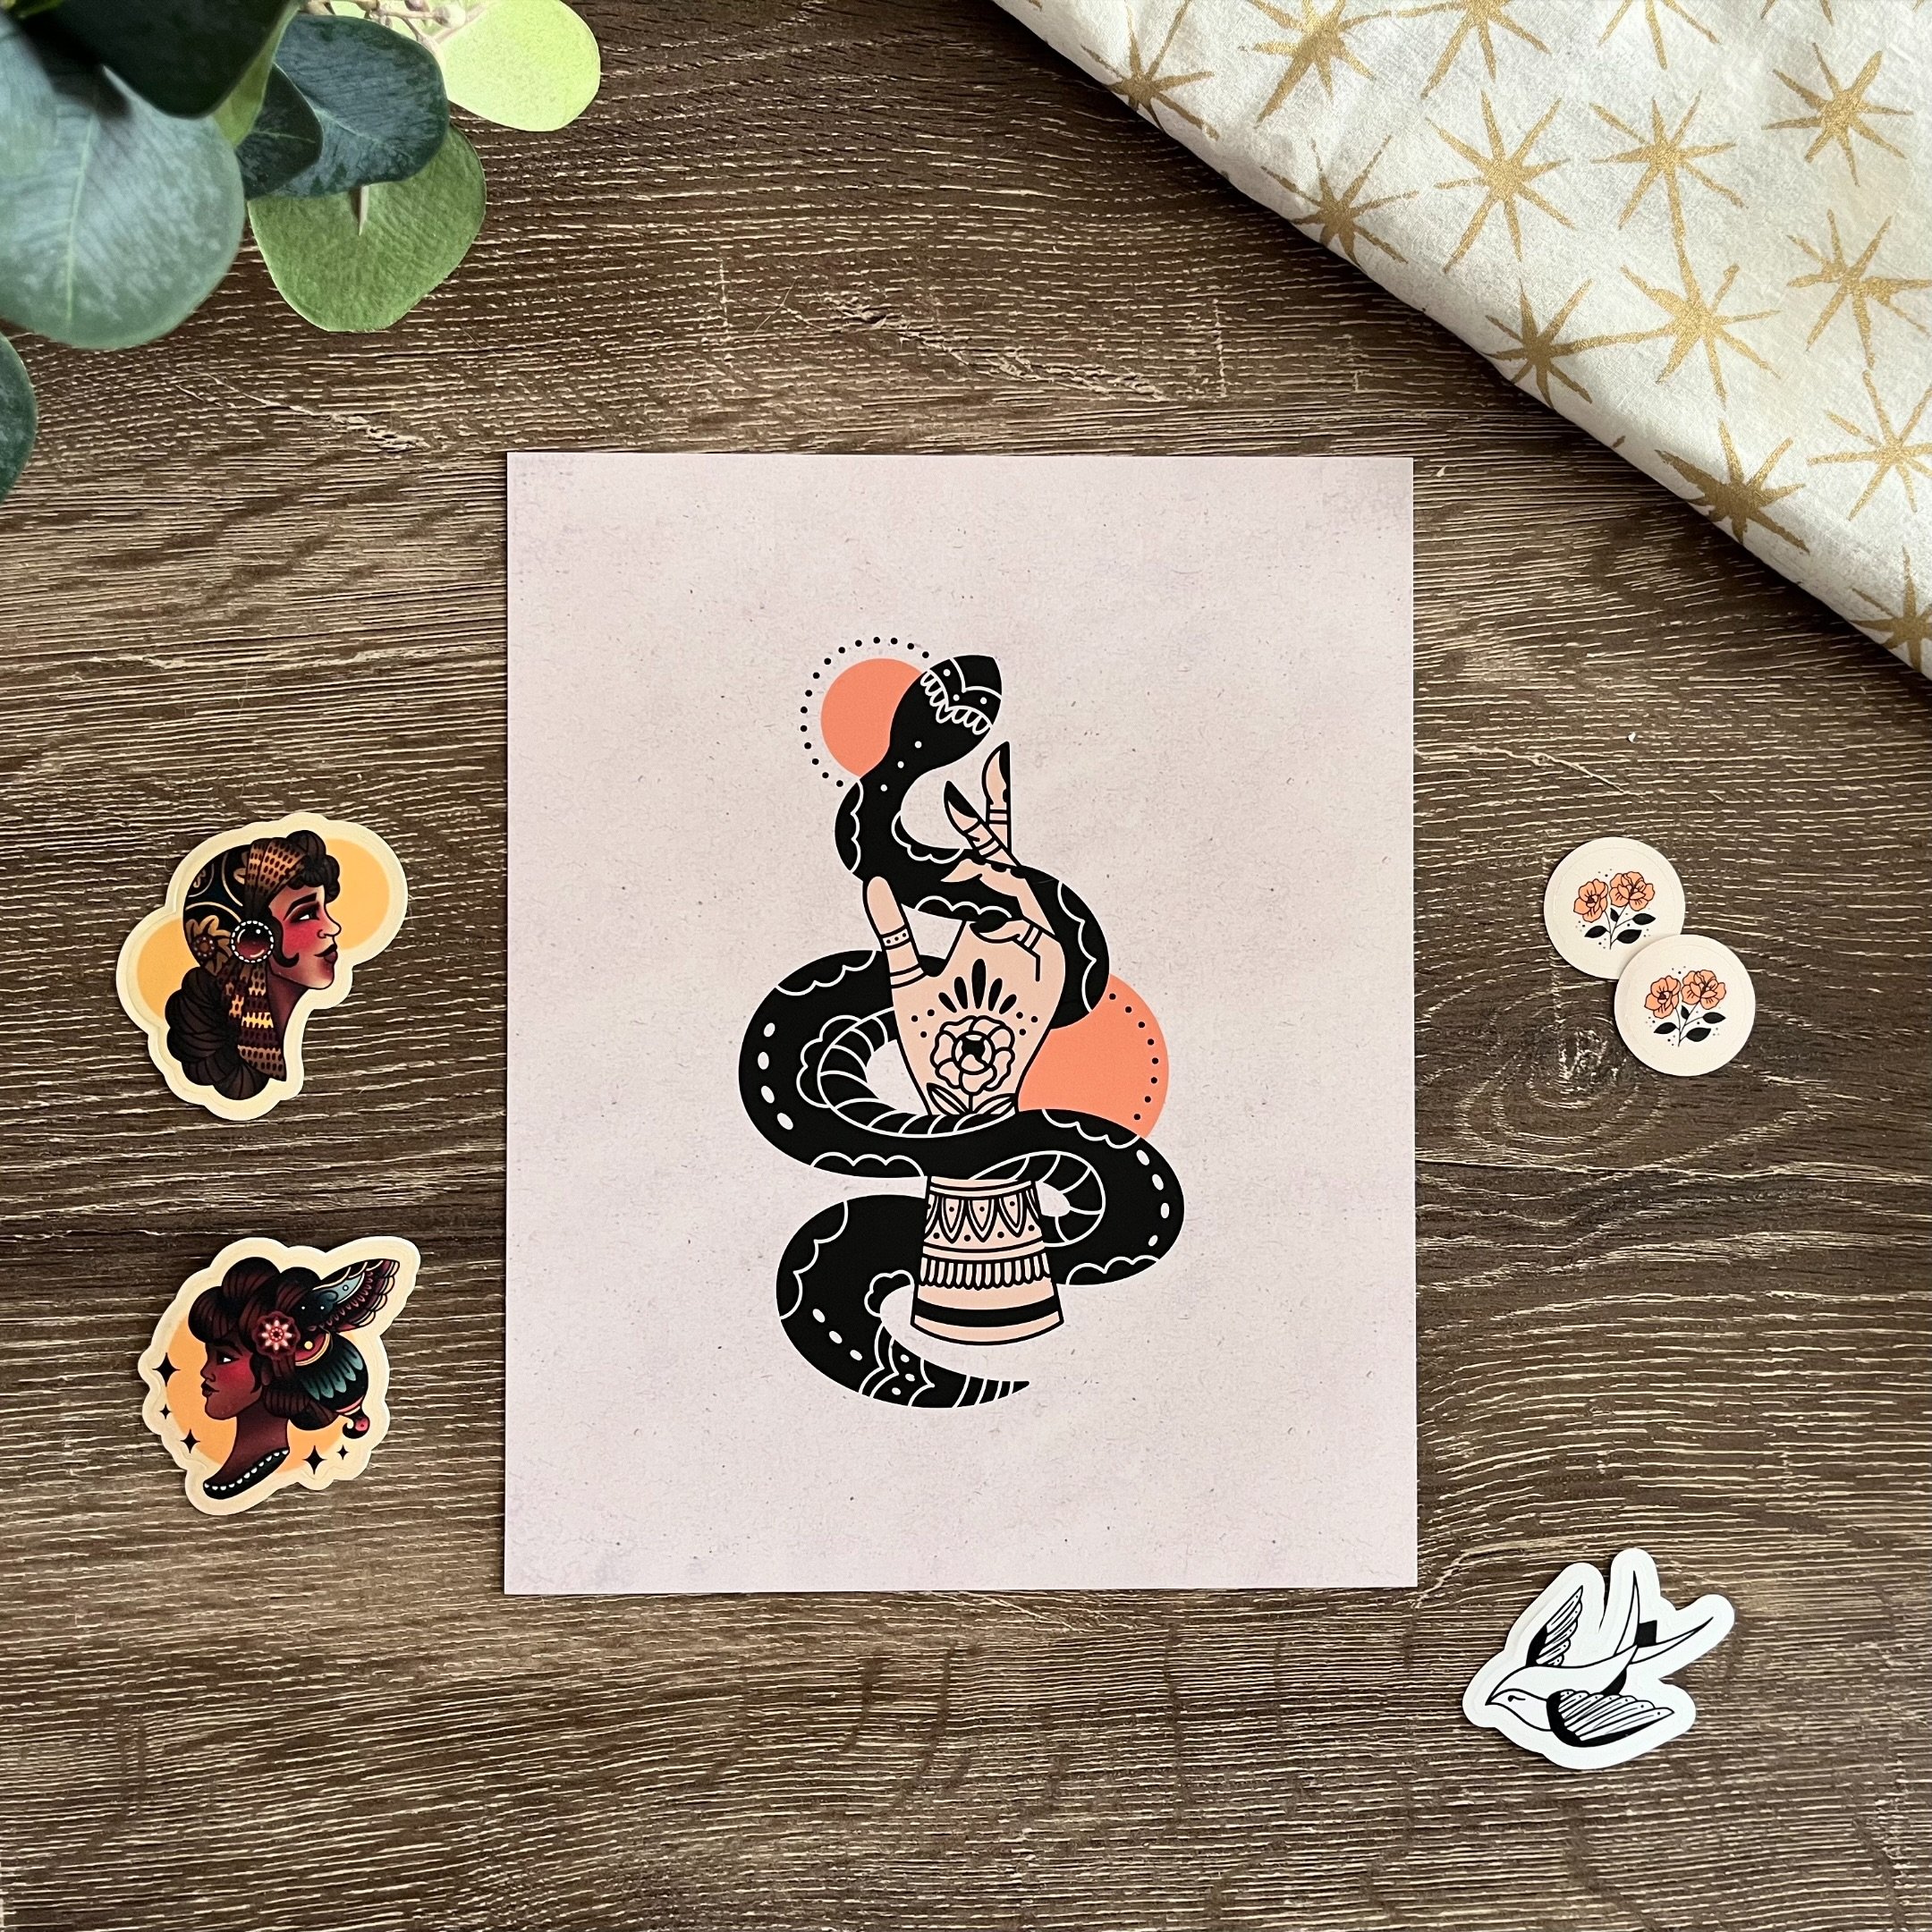 One of my absolute favorites from my print collection. 🐍🖤 This piece is an ode to traditional tattoos and resonates with my witchy spirit. Are you also witchy aesthetic obsessed? Tag your fellow kindred spirits who would appreciate this enchanting 